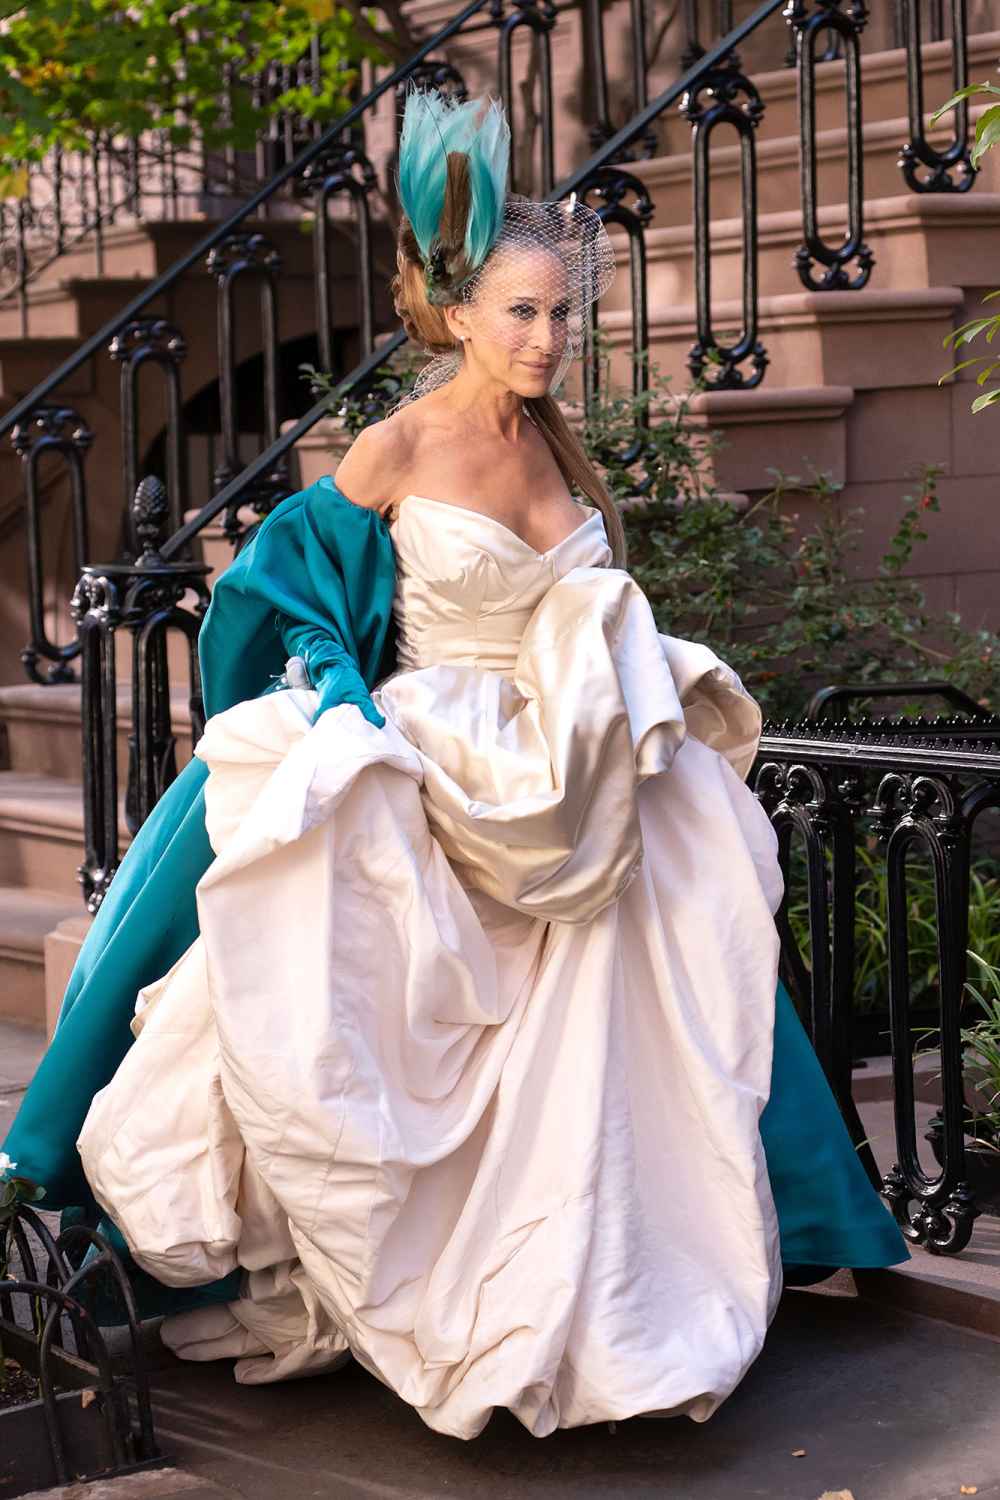 https://www.usmagazine.com/wp-content/uploads/2022/11/Sarah-Jessica-Parker-Appears-to-Bring-Back-Carrie-Wedding-Dress-2-And-Just-Like-That-2.jpg?w=1000&quality=40&strip=all